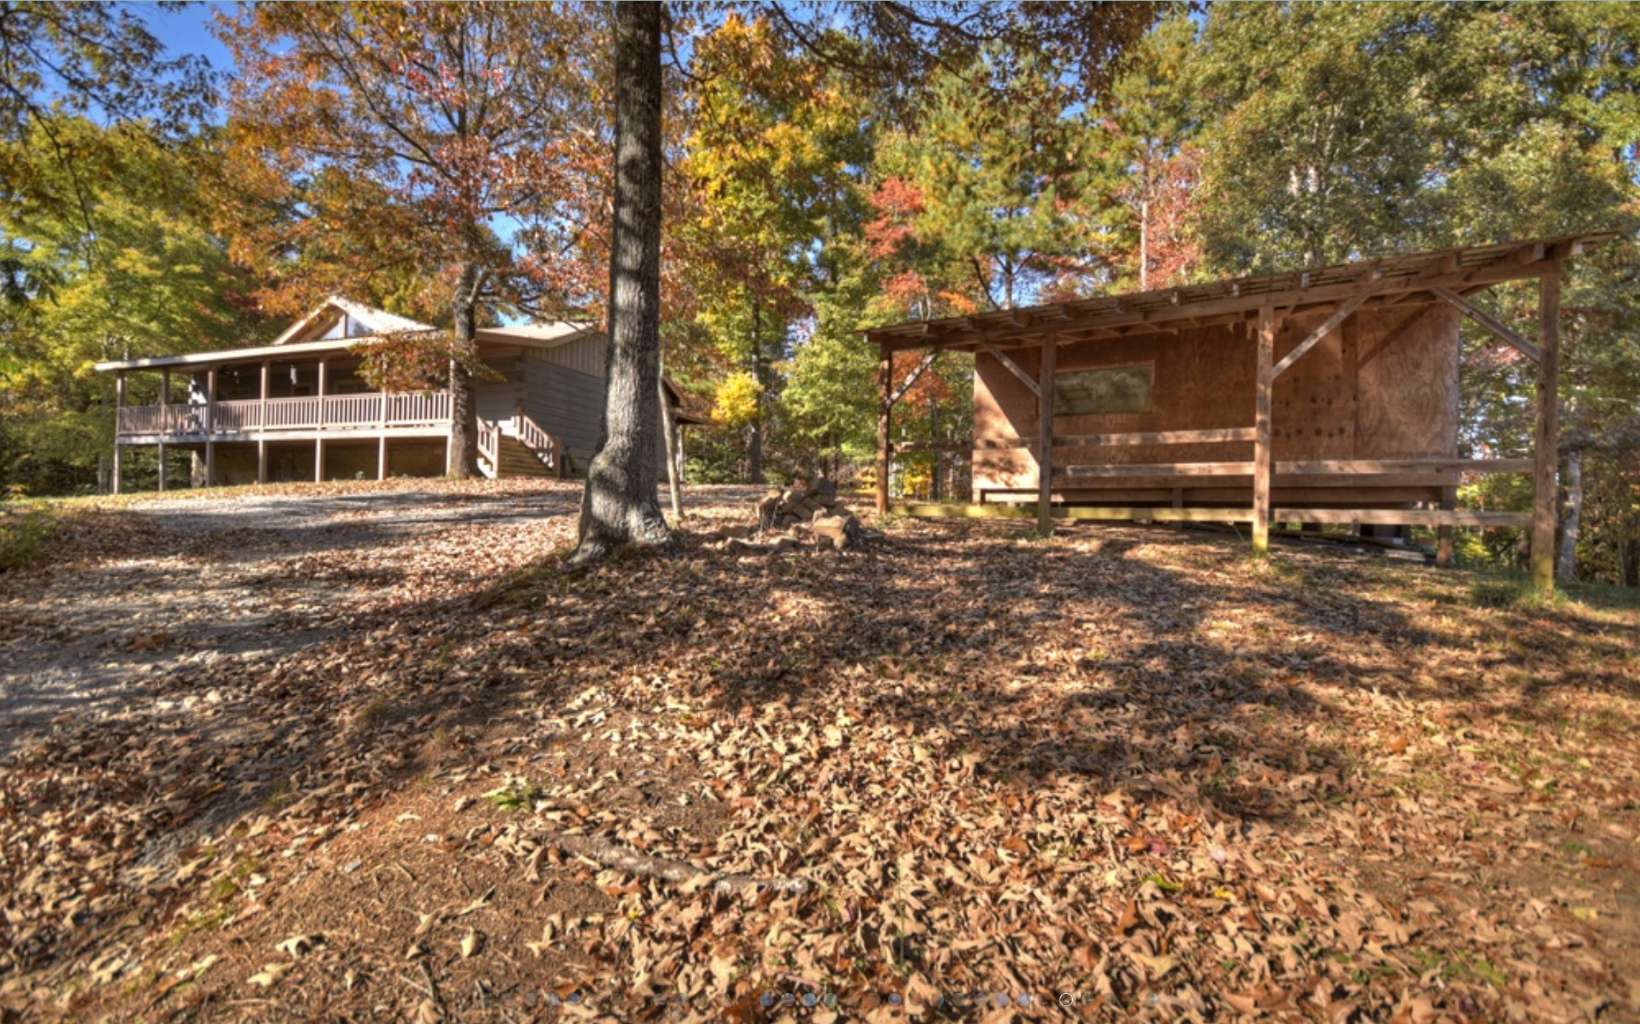 This beautiful true log cabin is nestled on a very private and wooded 1.01 acres just a short 10 minute drive from Historic Downtown Blue Ridge. Featuring an open floor plan that flows through the kitchen, dining area and into the livingroom complete with its own wood burning stove, stunning high vaulted ceilings with exposed wood beams, Bamboo flooring throughout the home, 3 bedrooms and 2 bathrooms with custom tiled showers, this spacious Cabin would make a wonderful home for a growing family or the perfect short term rental property! The property also includes a workshop complete with electricity!